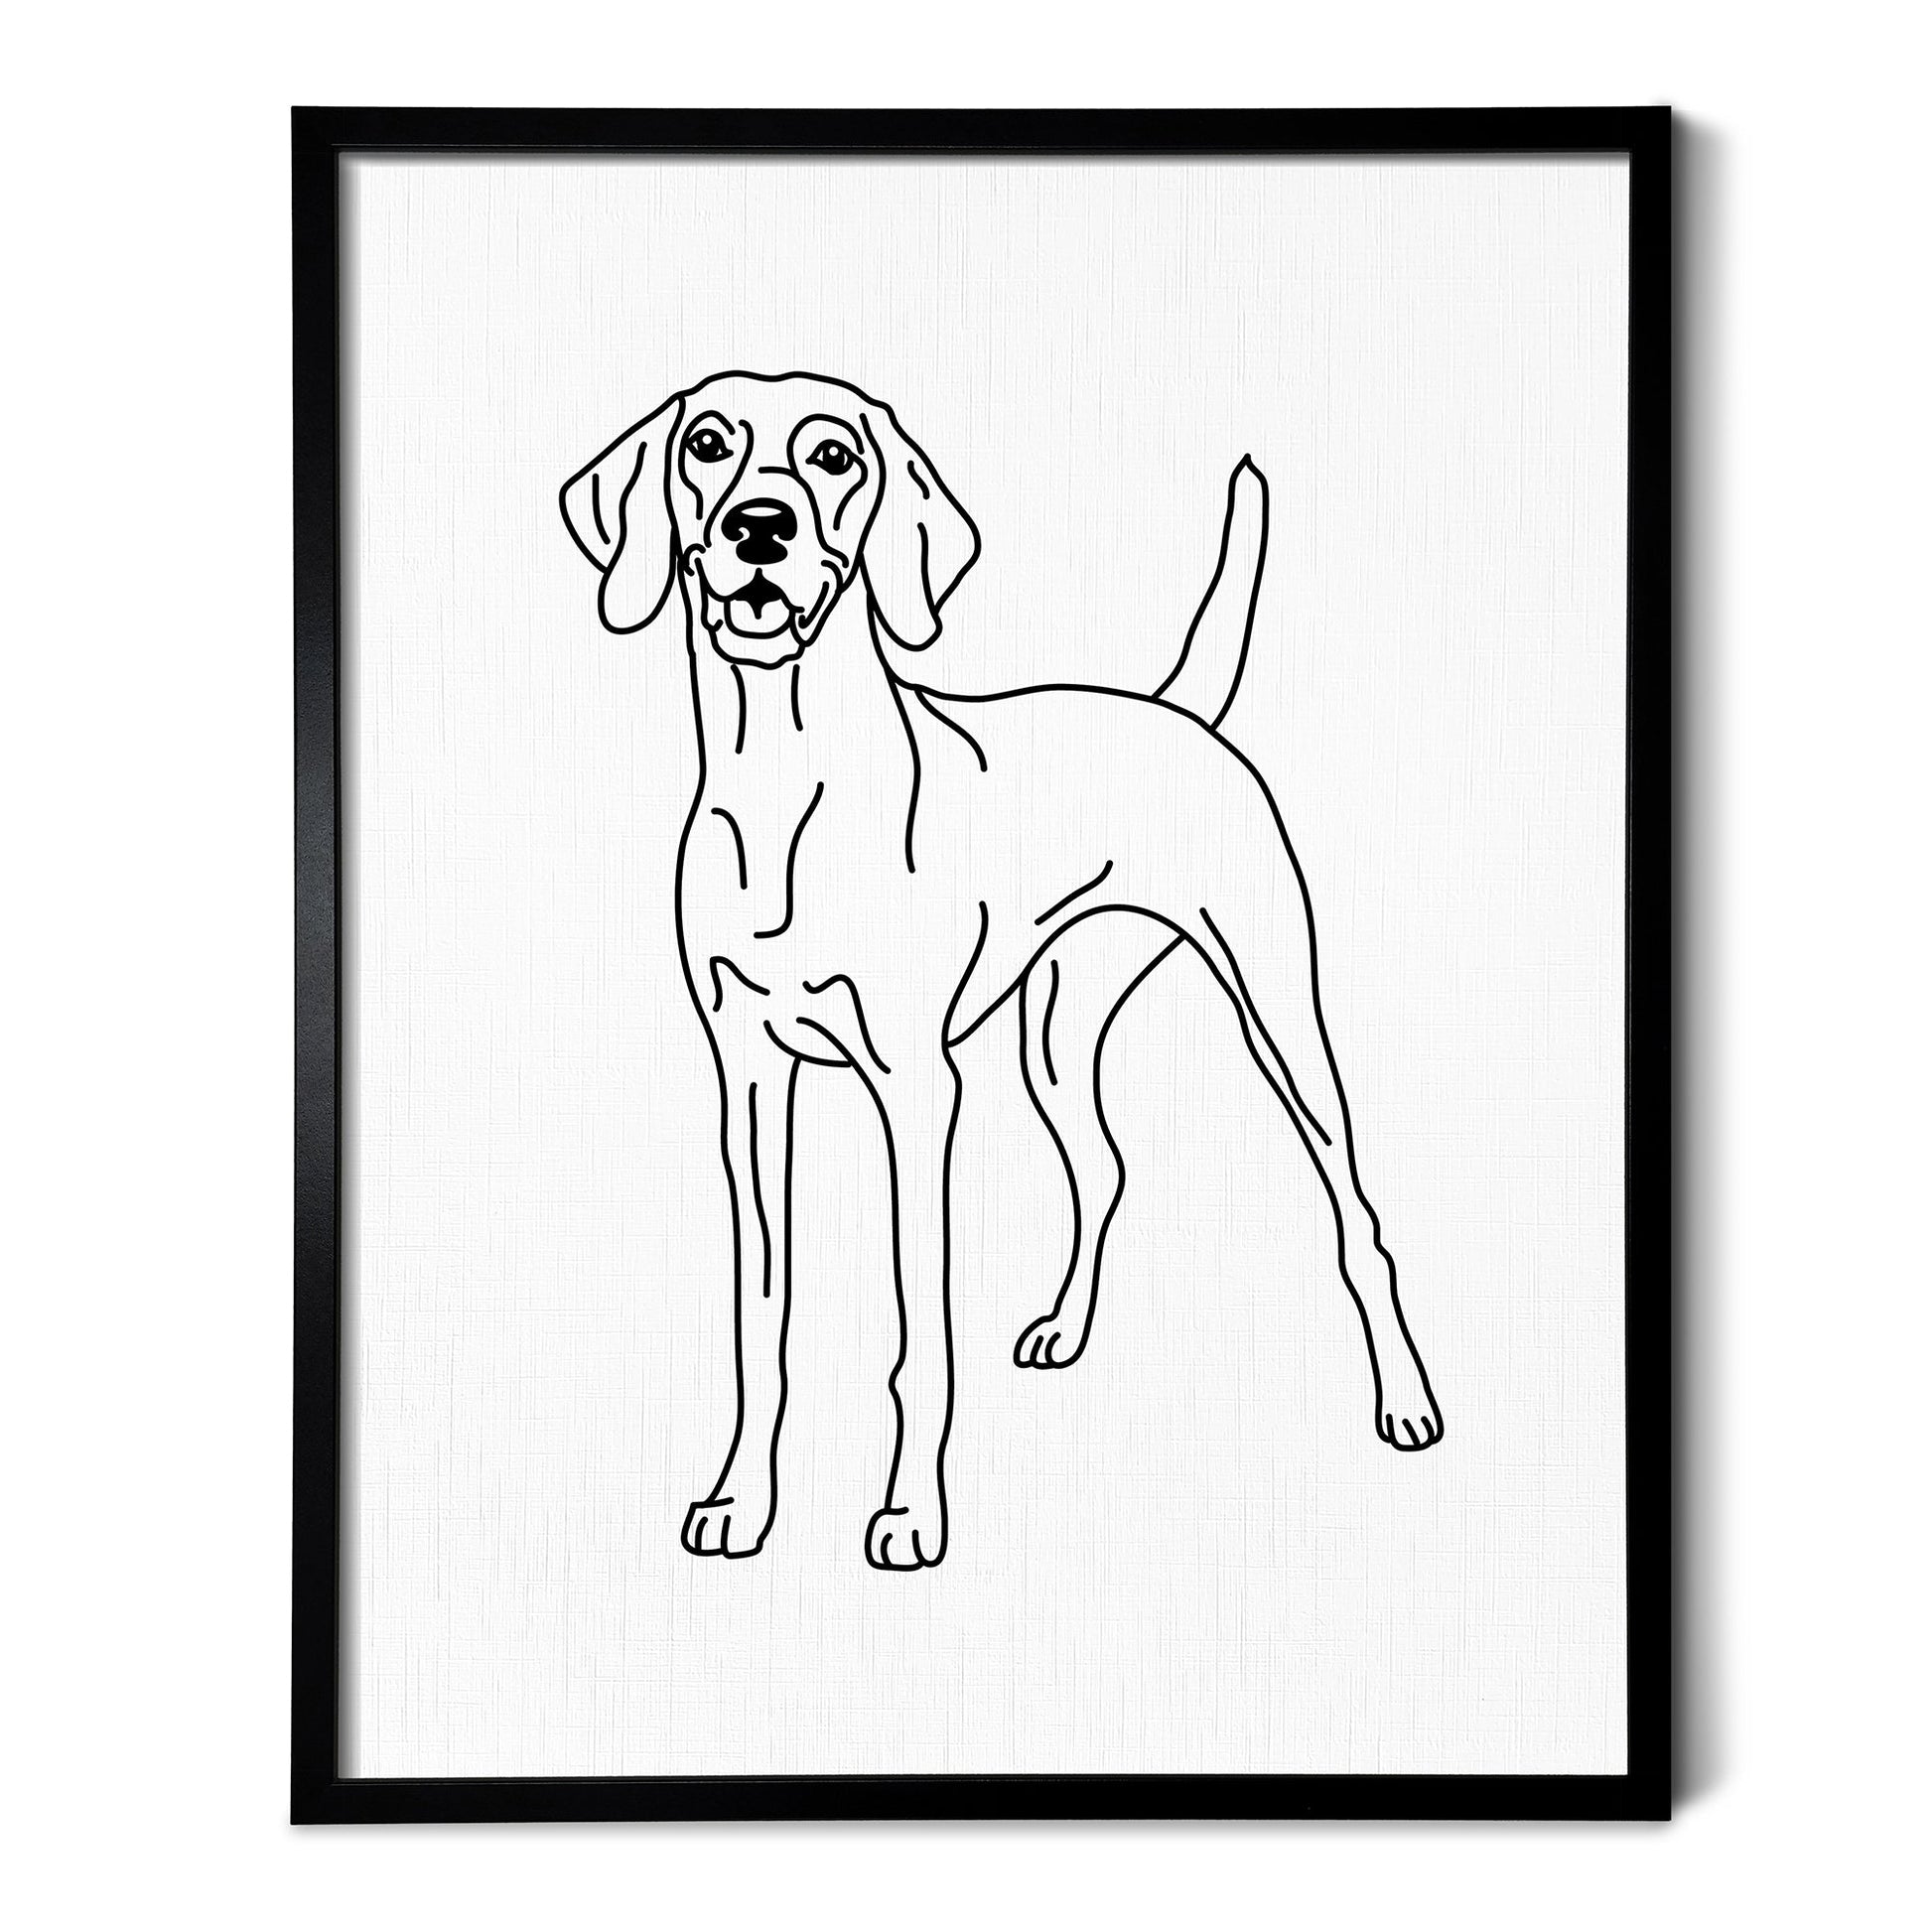 A line art drawing of a Vizsla dog on white linen paper in a thin black picture frame